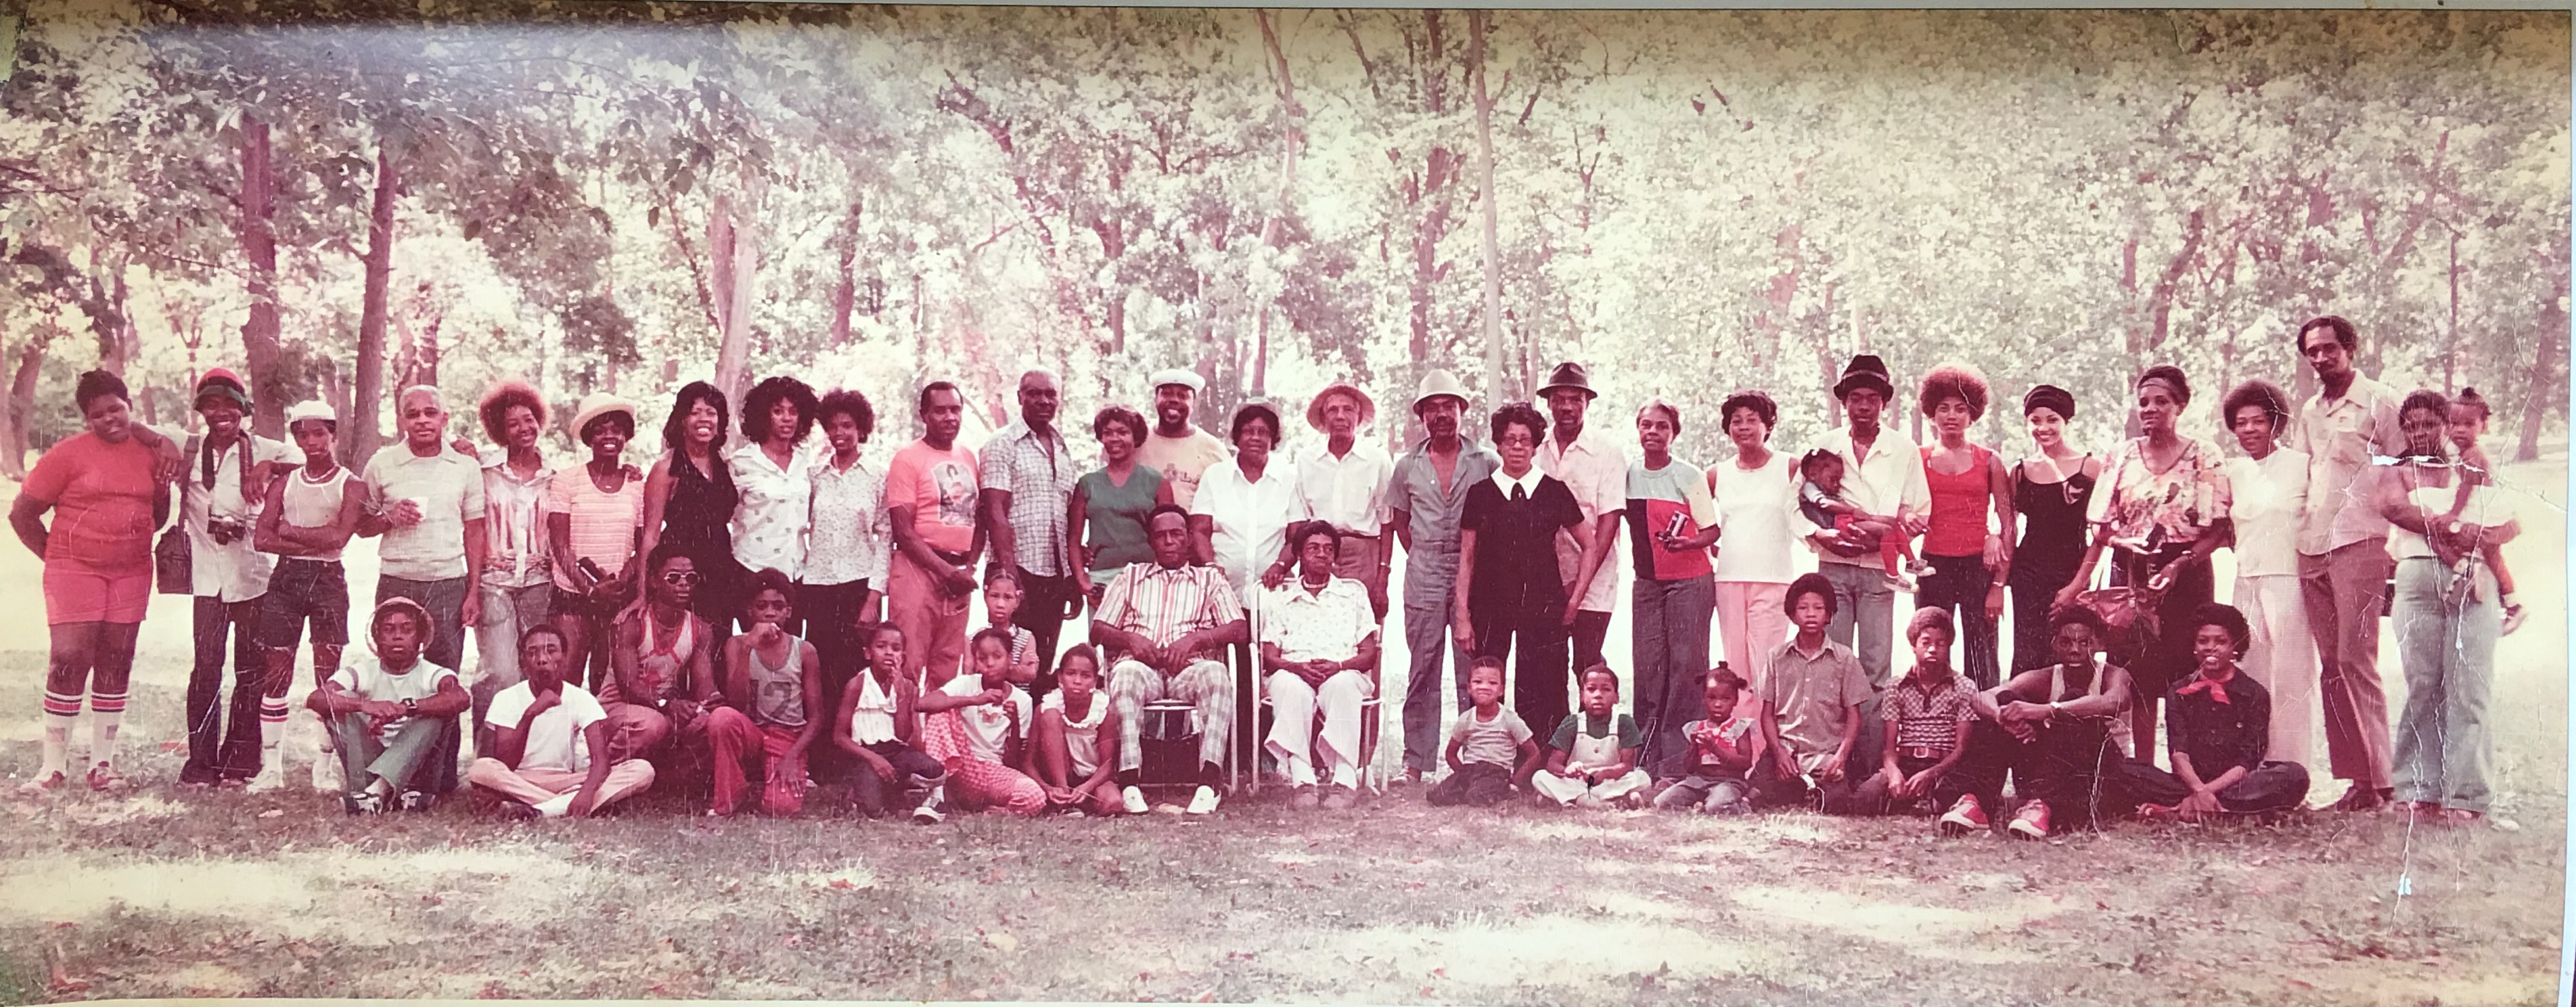 THE ORIGINAL BROWN-EWING FAMILY REUNION - KANSAS CITY, MO 1976. Anna (Ewing) Brown is the intersection/cornerstone of the Brown-Ewing Family and the originator of the Brown-Ewing Family Reunion, 